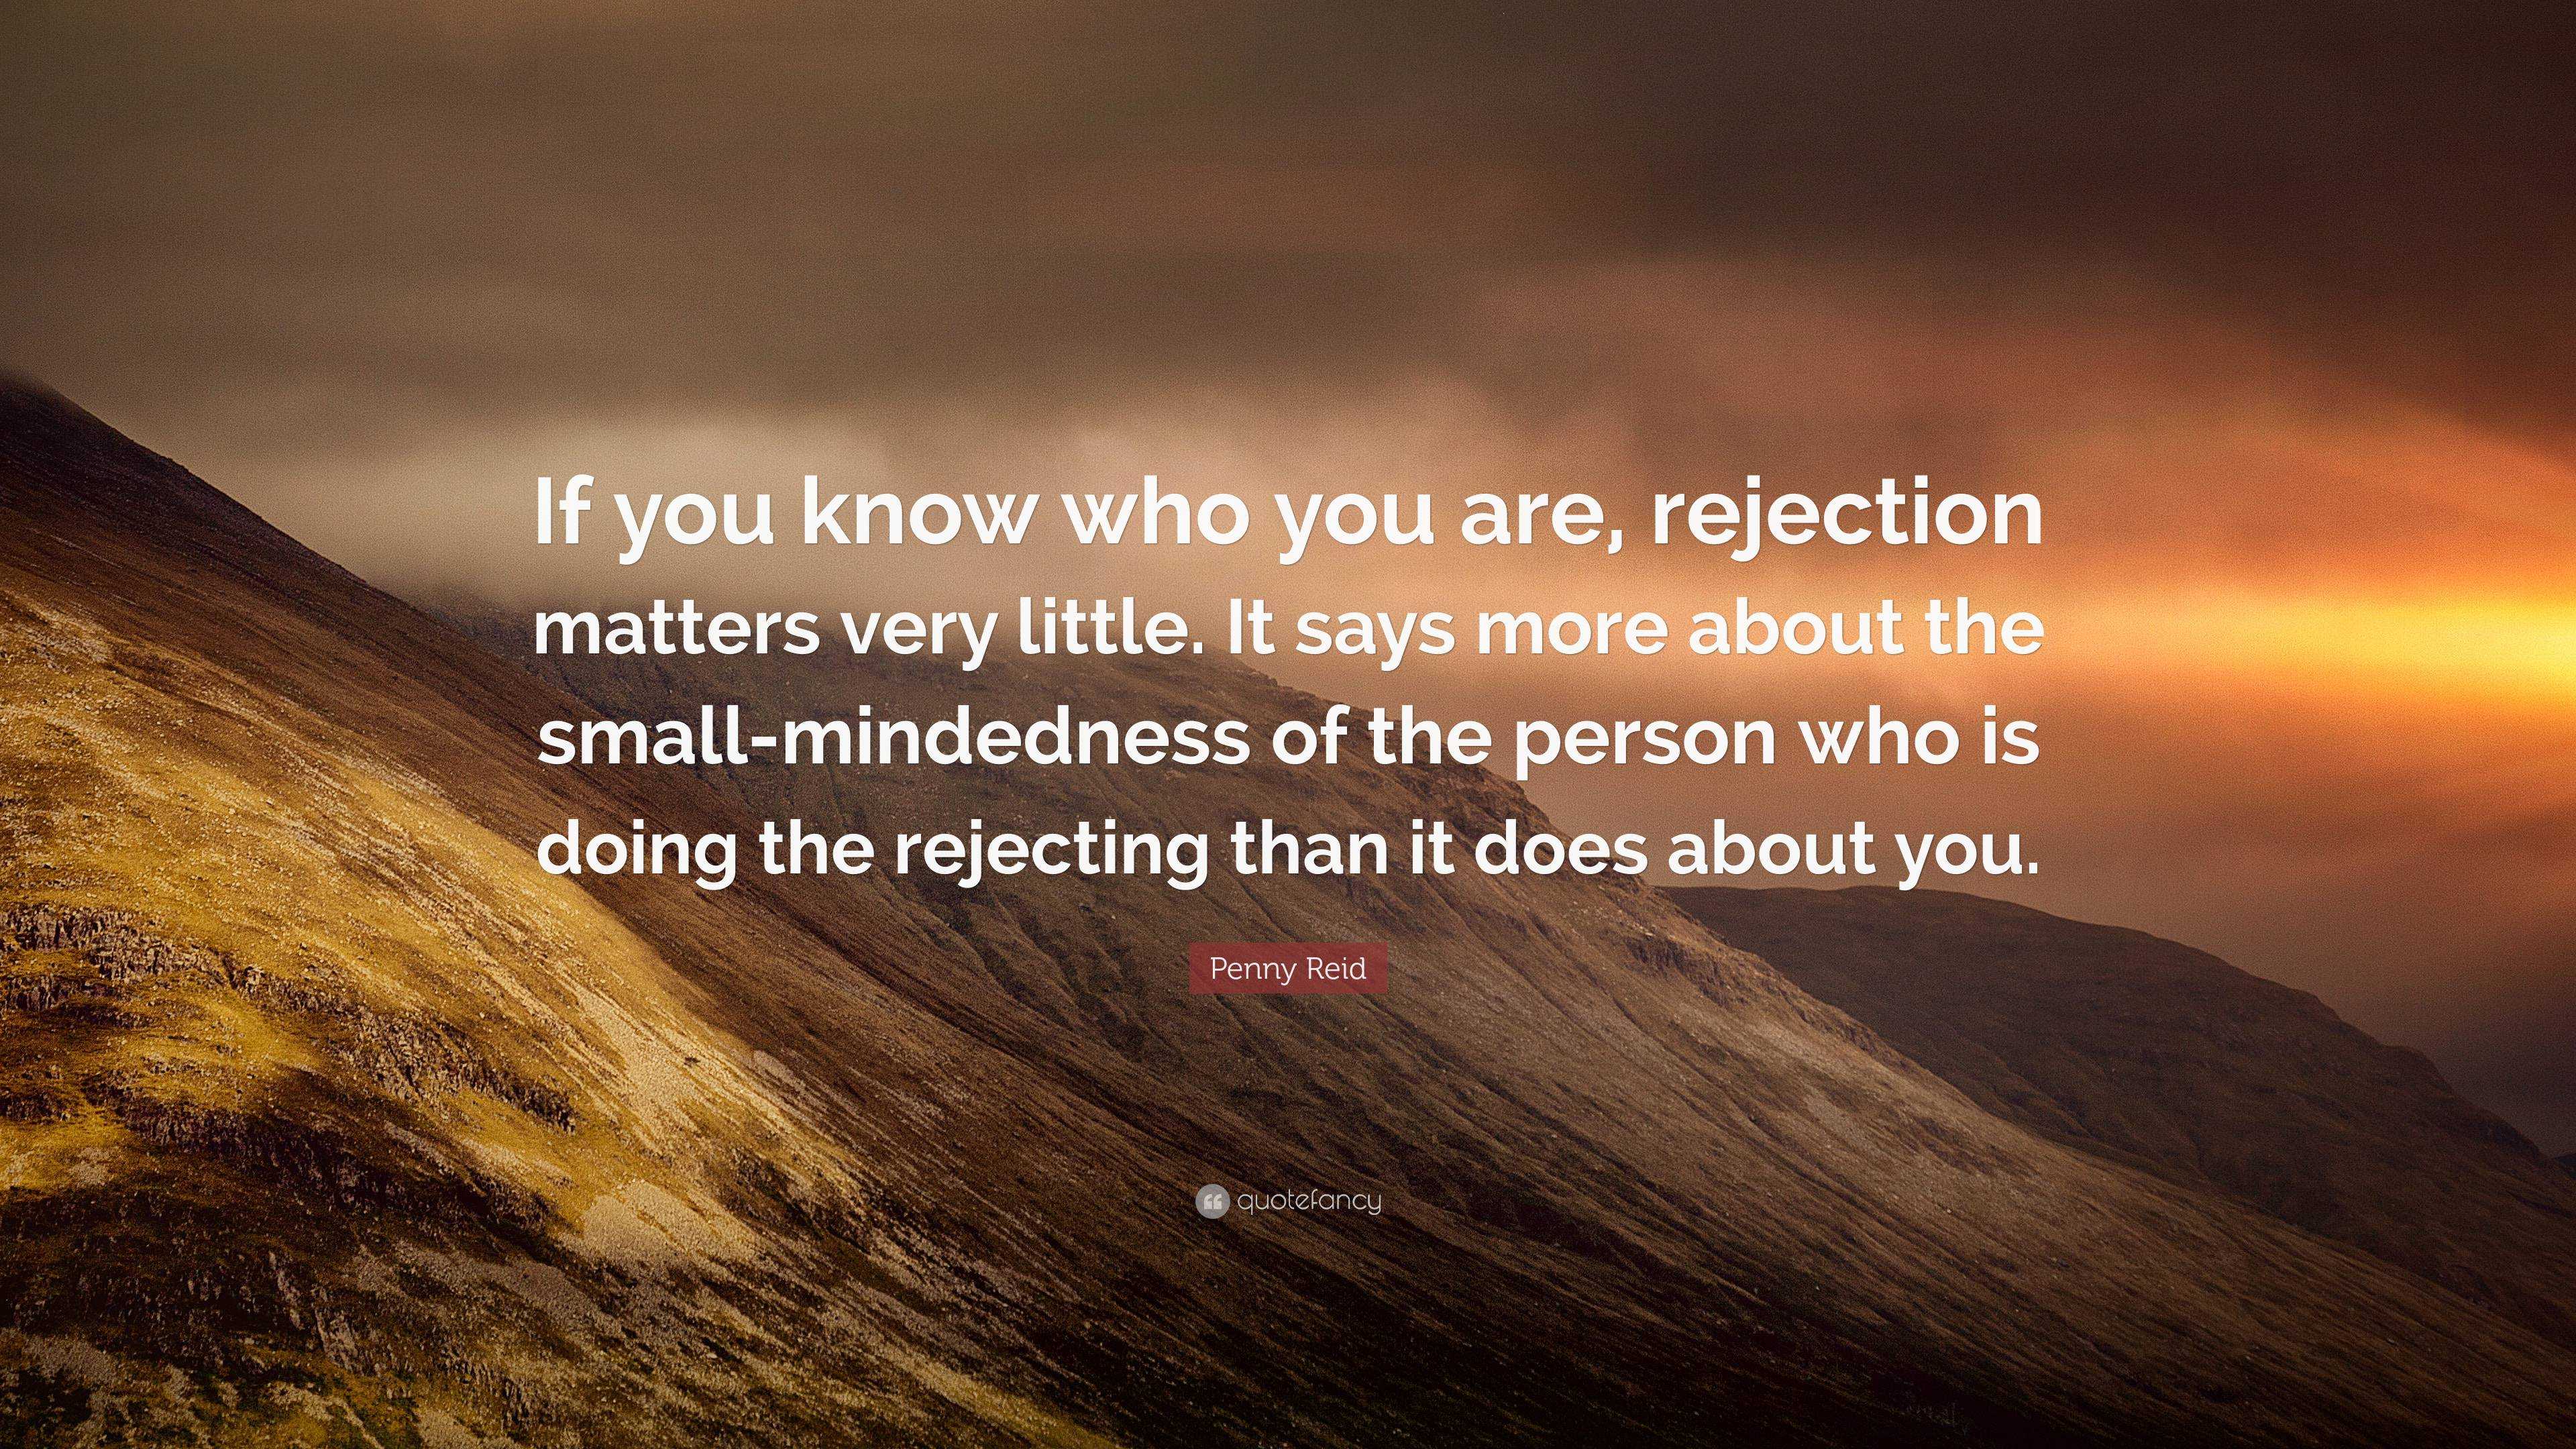 Penny Reid Quote: “If you know who you are, rejection matters very ...